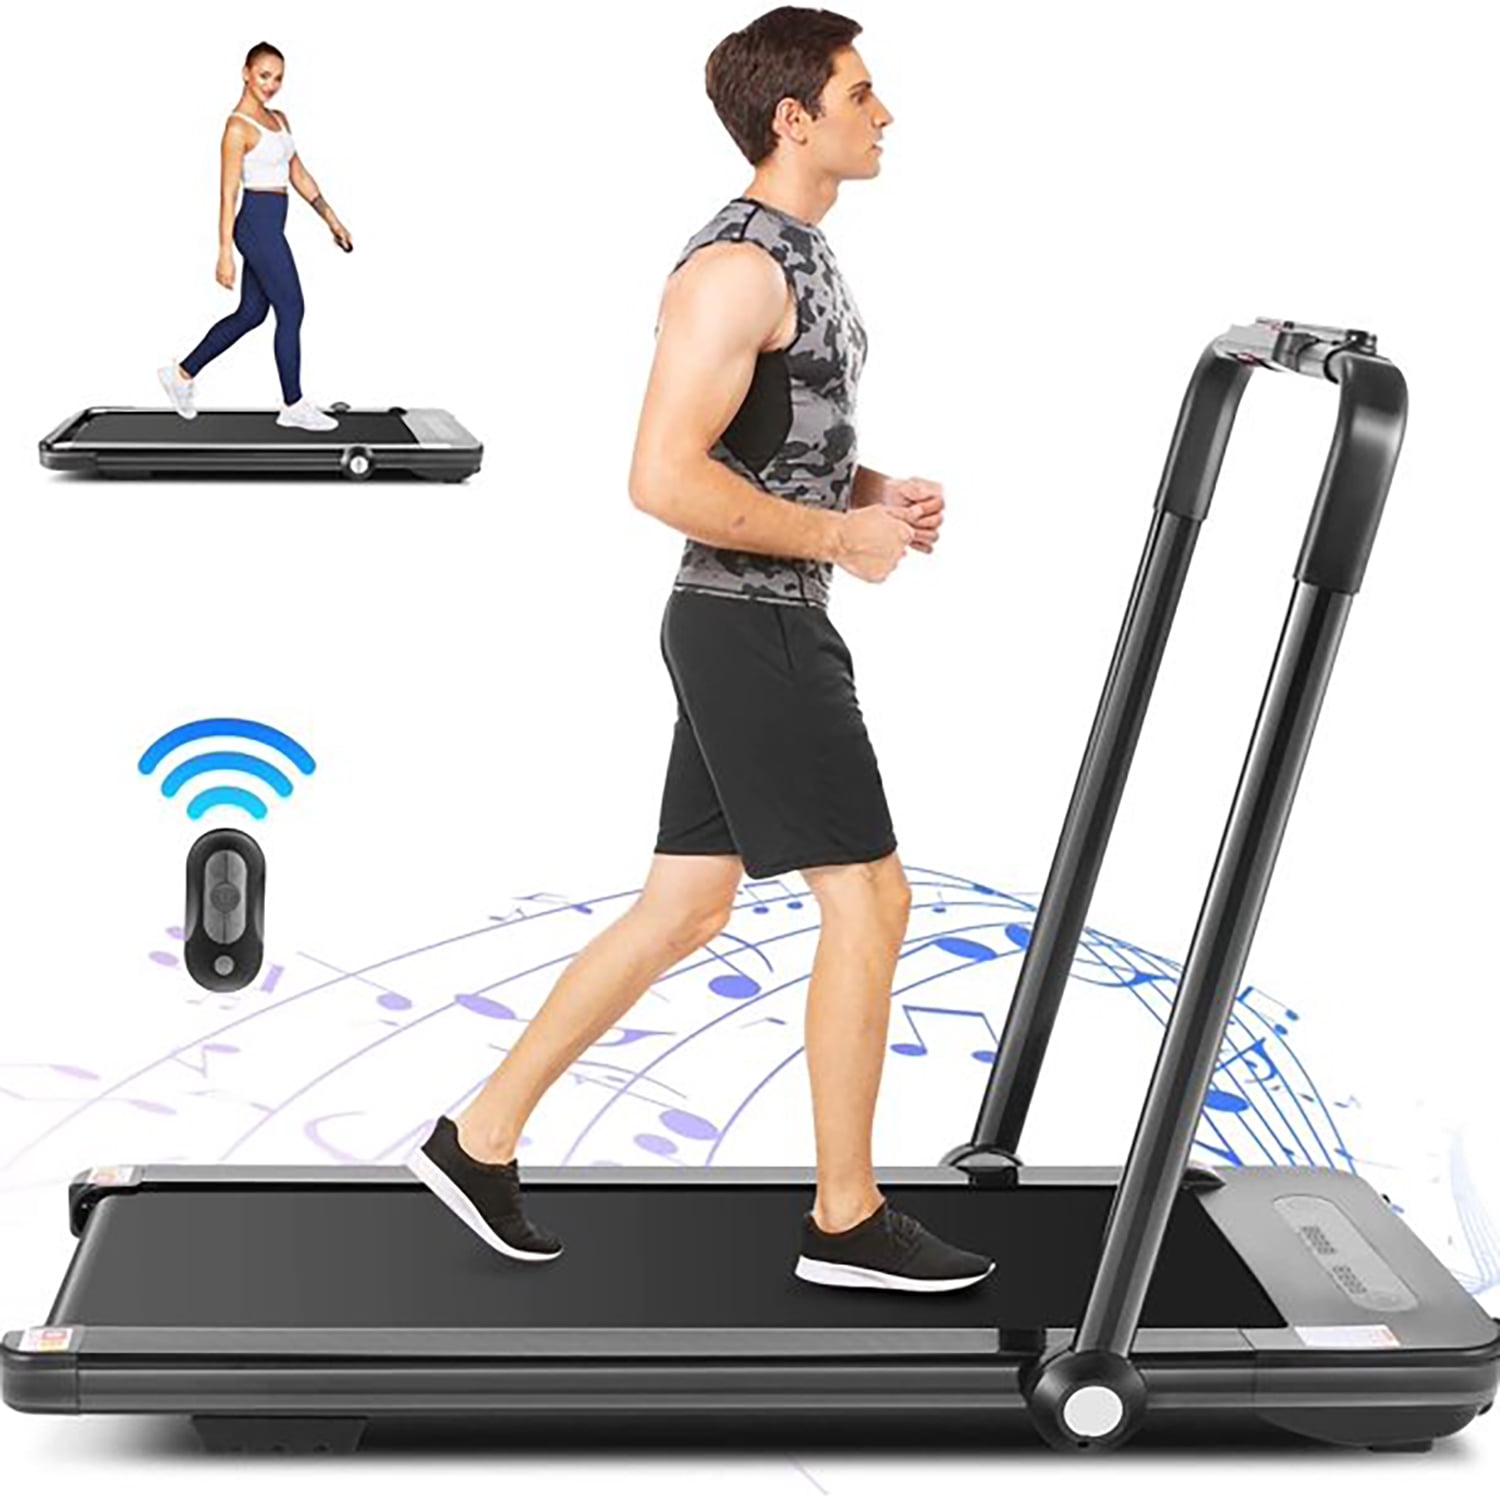 Remote Control Bluetooth Speakers Walking Jogging Machine for Home/Office Use 2.25HP Folding Electric Treadmills Goplus 3-in-1 Treadmill with Large Desk LCD Display 